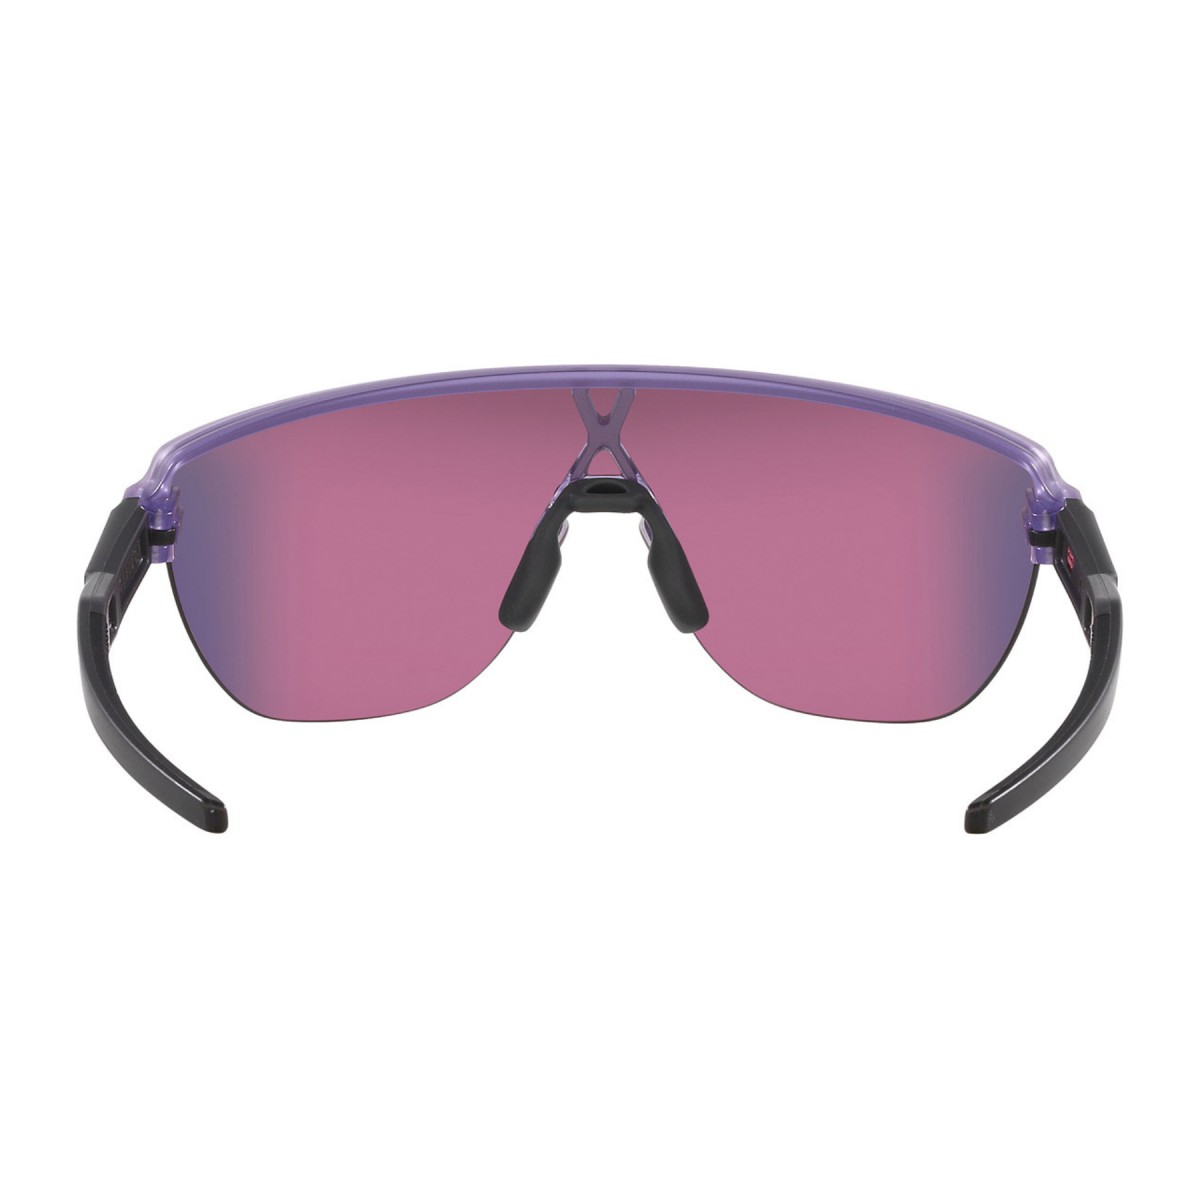 Buy Oakley Corridor Violet Glasses At The Best Price | Free shipping